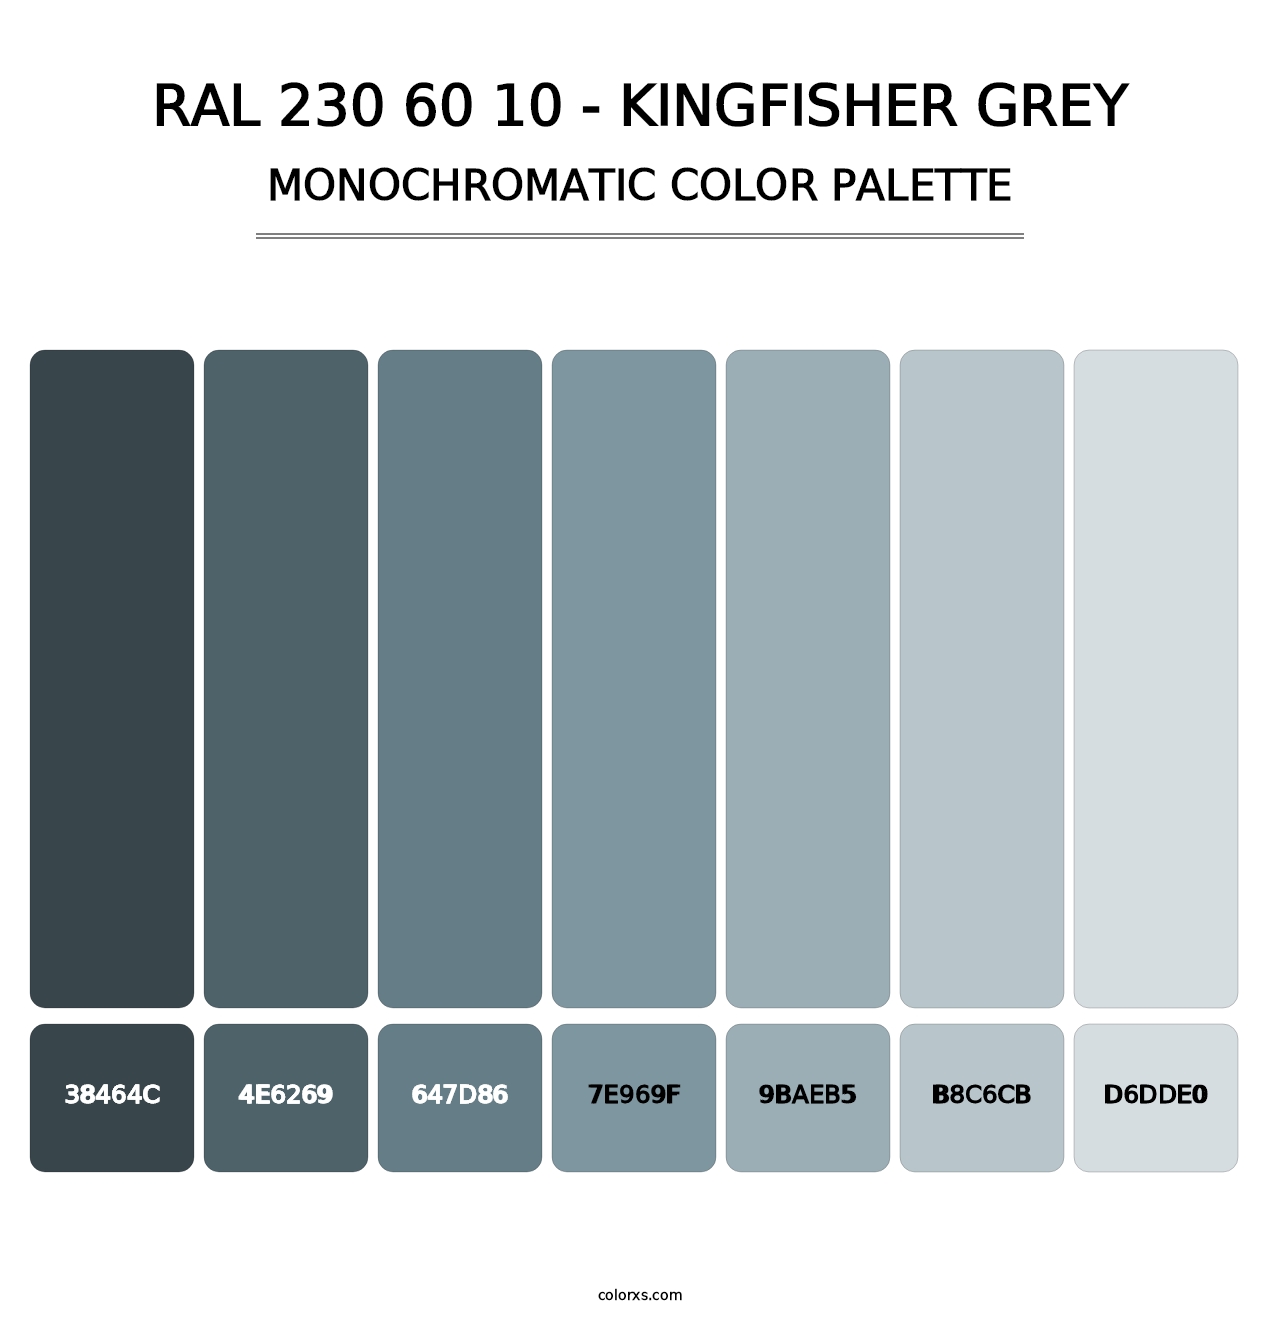 RAL 230 60 10 - Kingfisher Grey - Monochromatic Color Palette